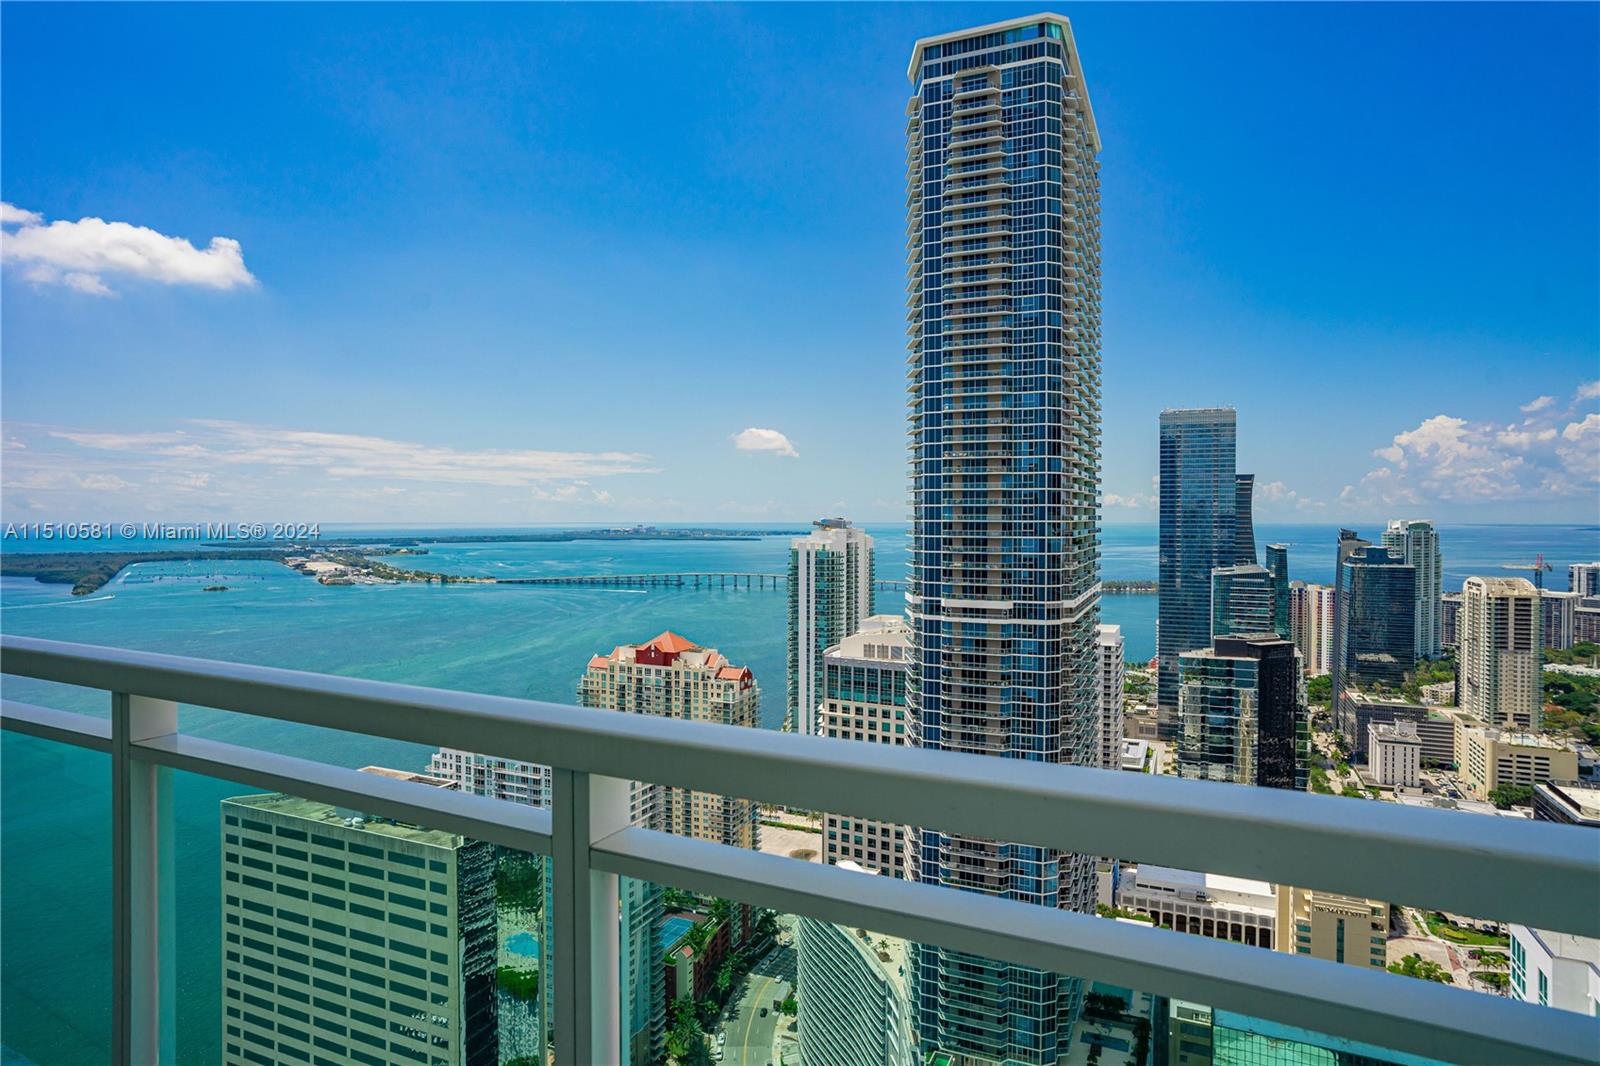 BEAUTIFUL 2BEDS/2BATHS WITH WATER VIEW IN THE HEART OF BRICKELL, HIGHT CEILING, BEST LOCATION, CLOSE TO MARY BRICKELL VILLAGE, DOWN TOWN MIAMI AND MORE, WHITE PORCELAIN FLOOR, EASY TO SHOW